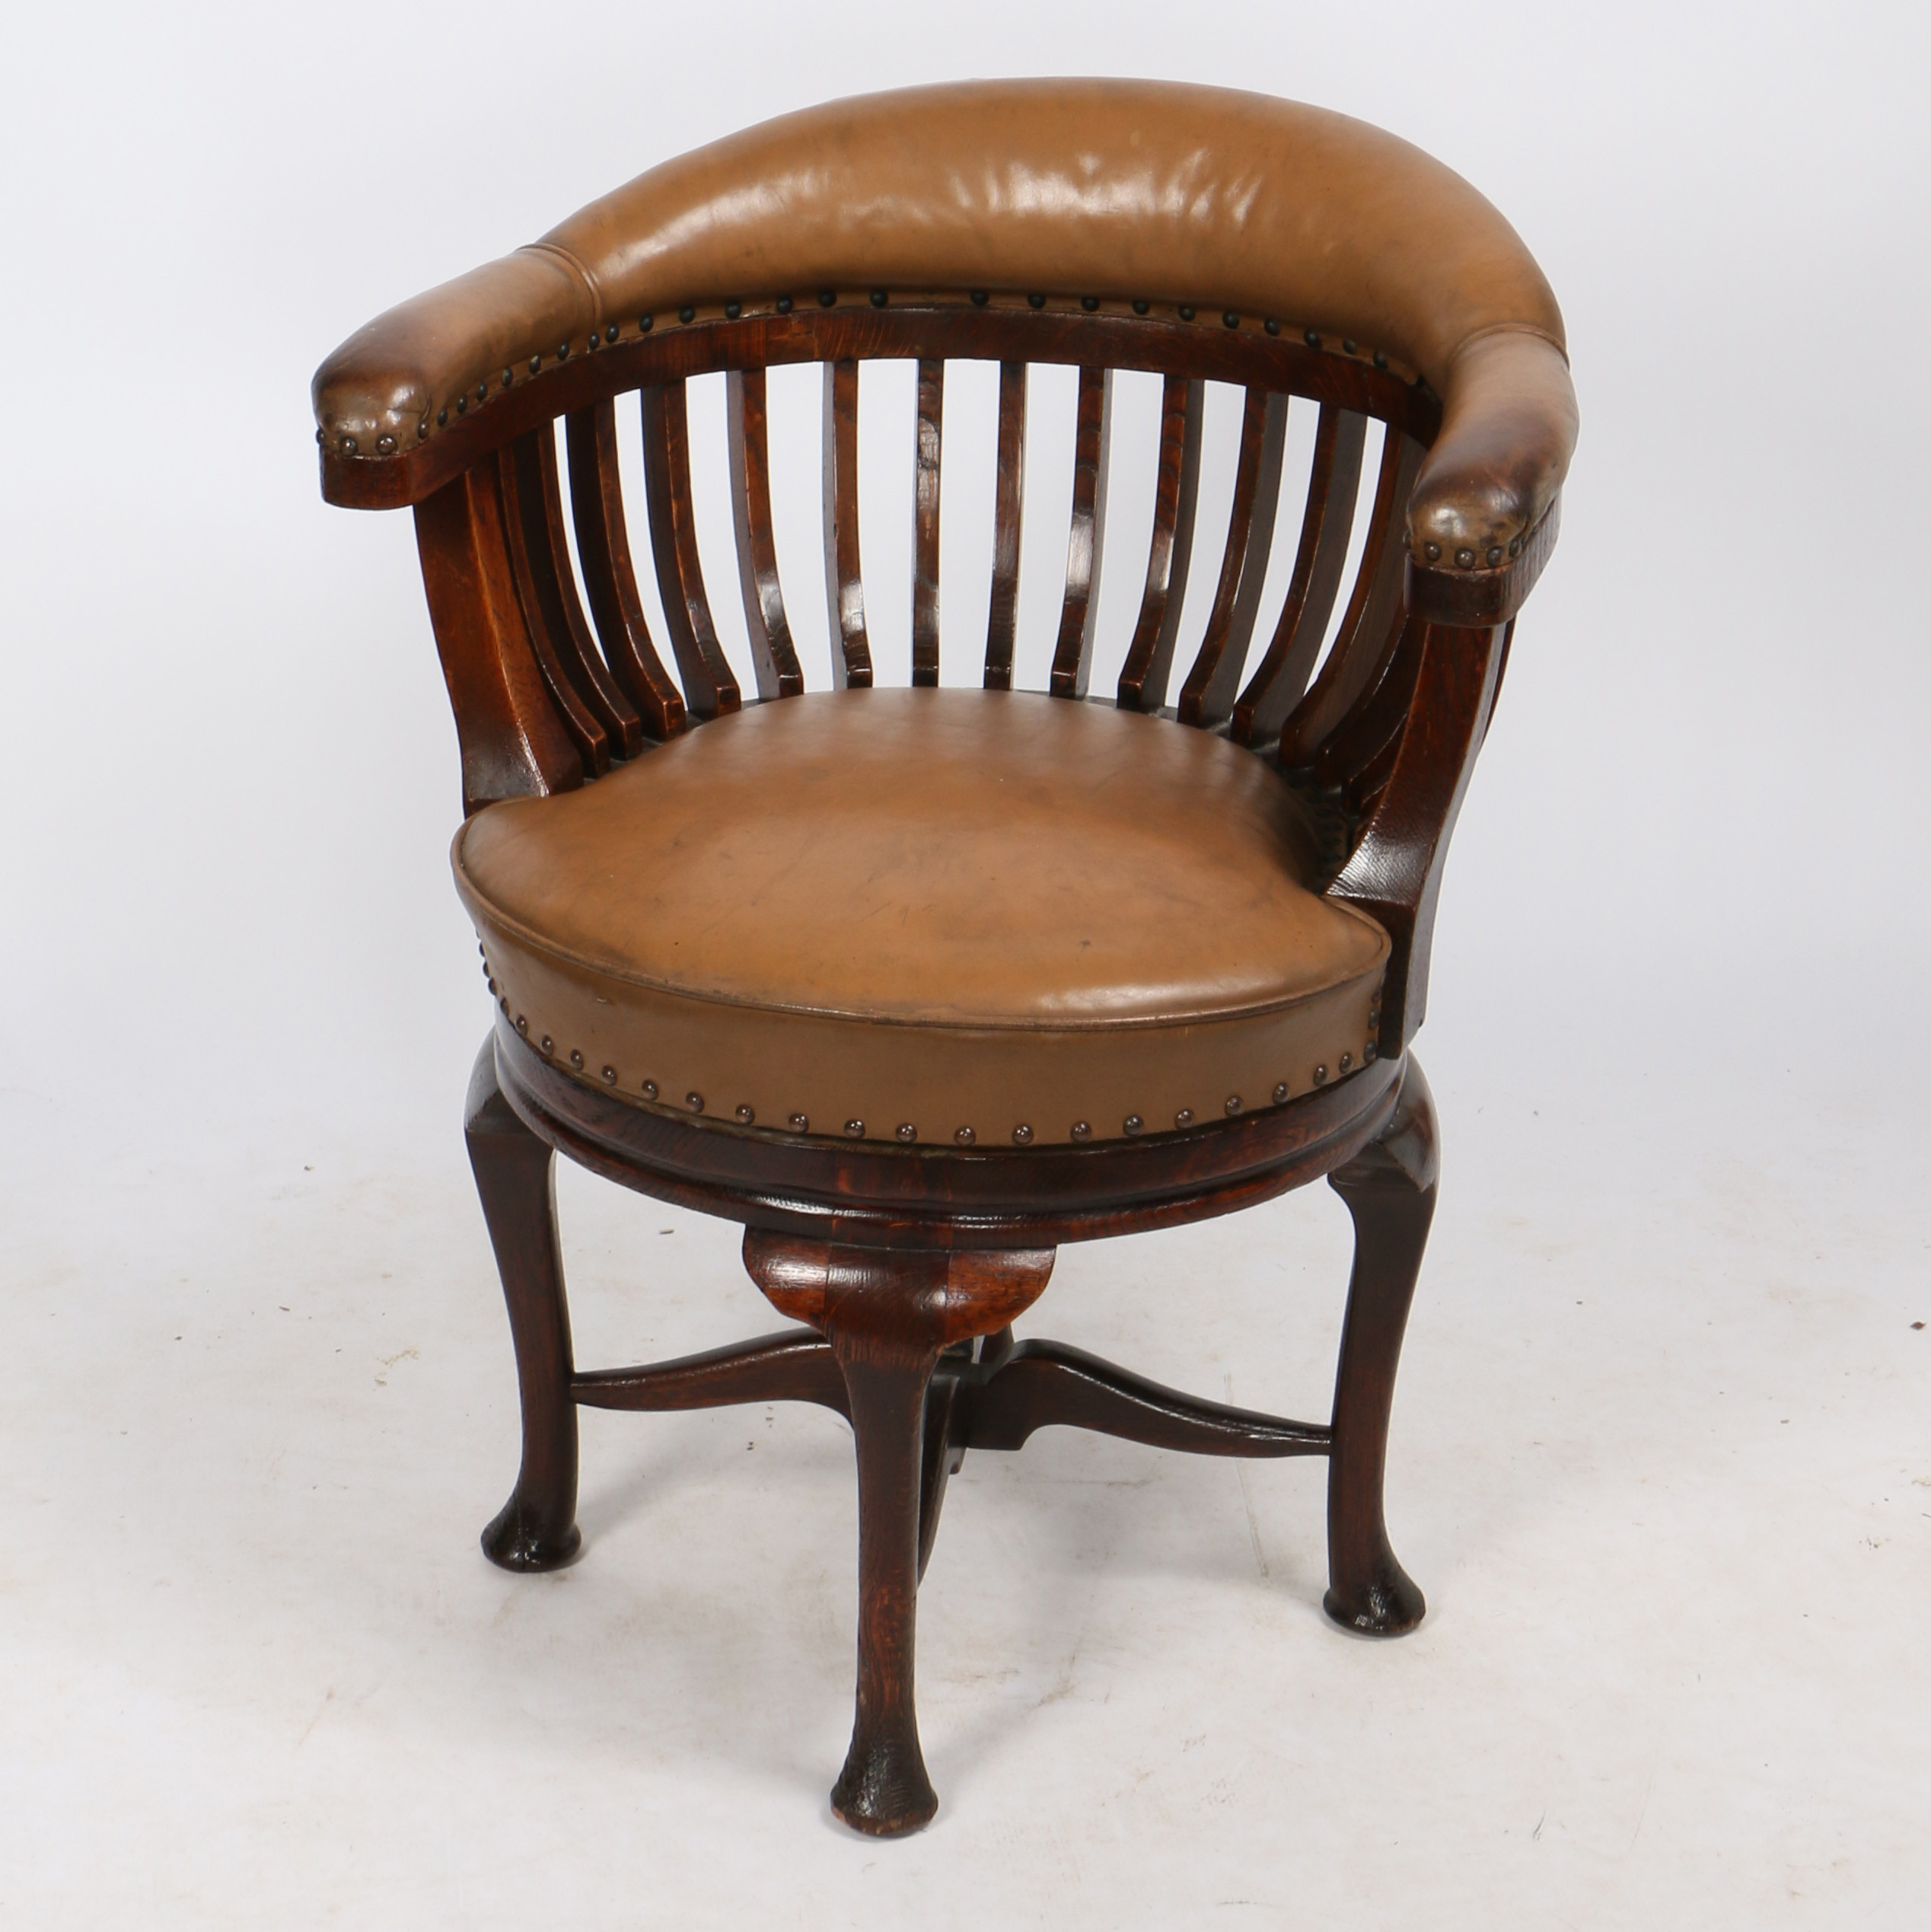 AN EARLY 20TH CENTURY OAK AND LEATHER CAPTAIN'S SWIVEL DESK CHAIR.